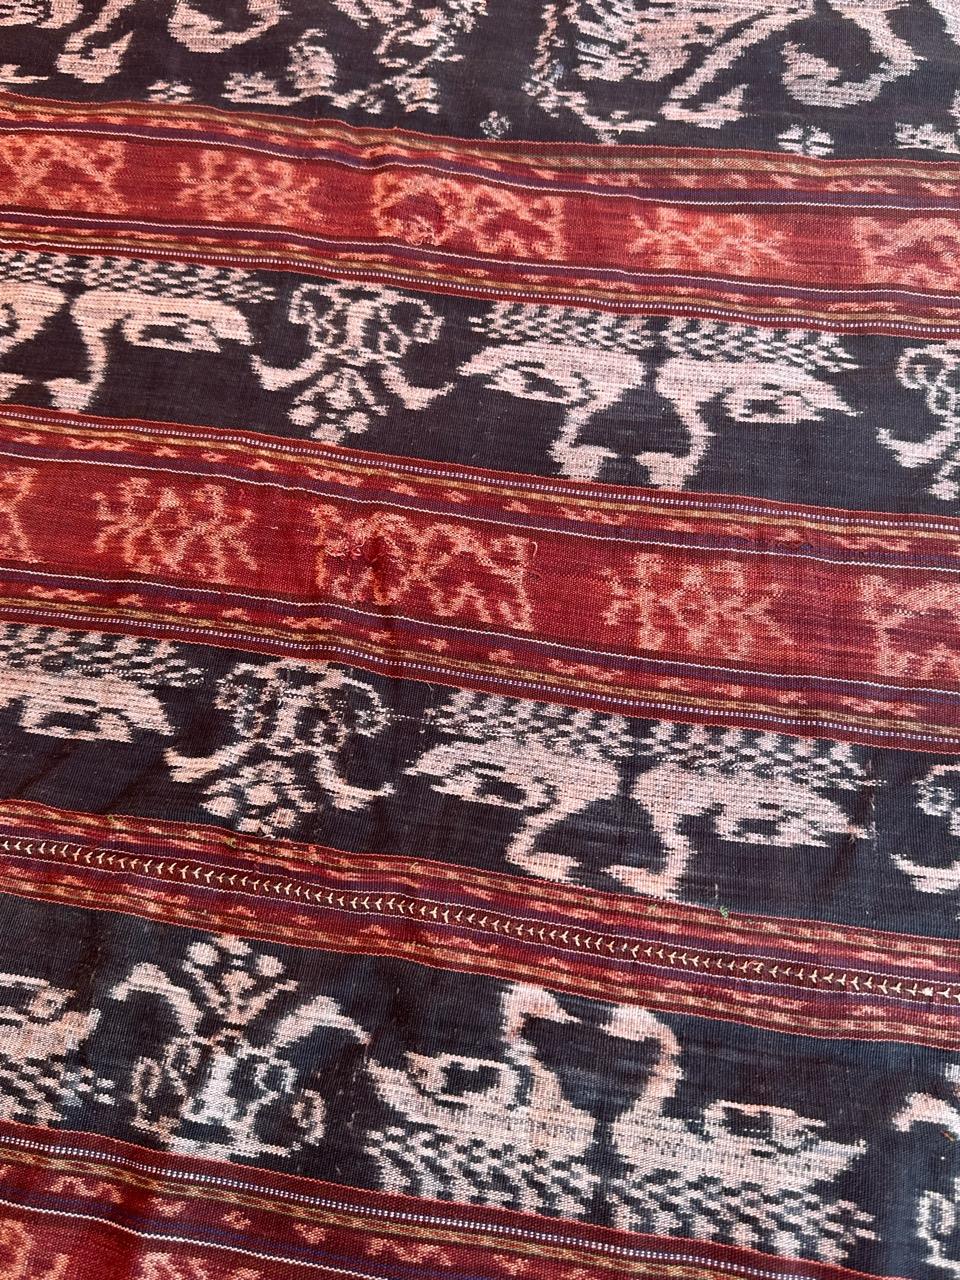 Cotton Bobyrug’s Vintage Indonesian Ikat Tapestry or Tablecloth For Sale